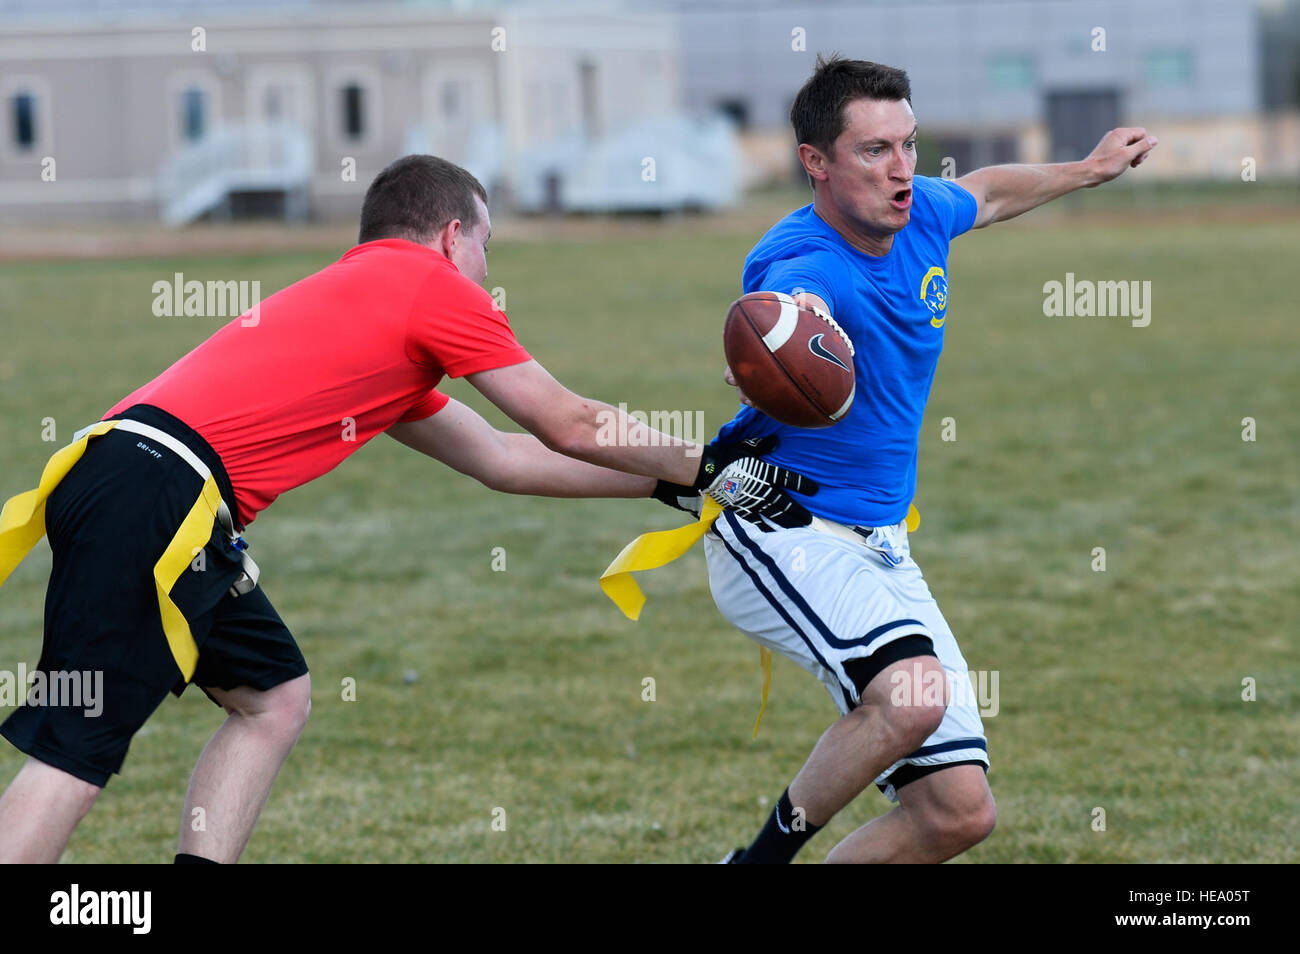 SCHRIEVER AIR FORCE BASE, Colo. -- Josh Print, 1st Space Operations Squadron, reaches the ball across the goalline just before his flag is pulled during the intramural flag football championship game at Schriever Air Force Base, Colorado, Thursday, Oct. 13, 2016. Print accounted for all five 1 SOPS touchdowns, one rushing and four passing, to lead his team to a 35-18 victory over the 3rd Space Operations Squadron. Christopher DeWitt) Stock Photo